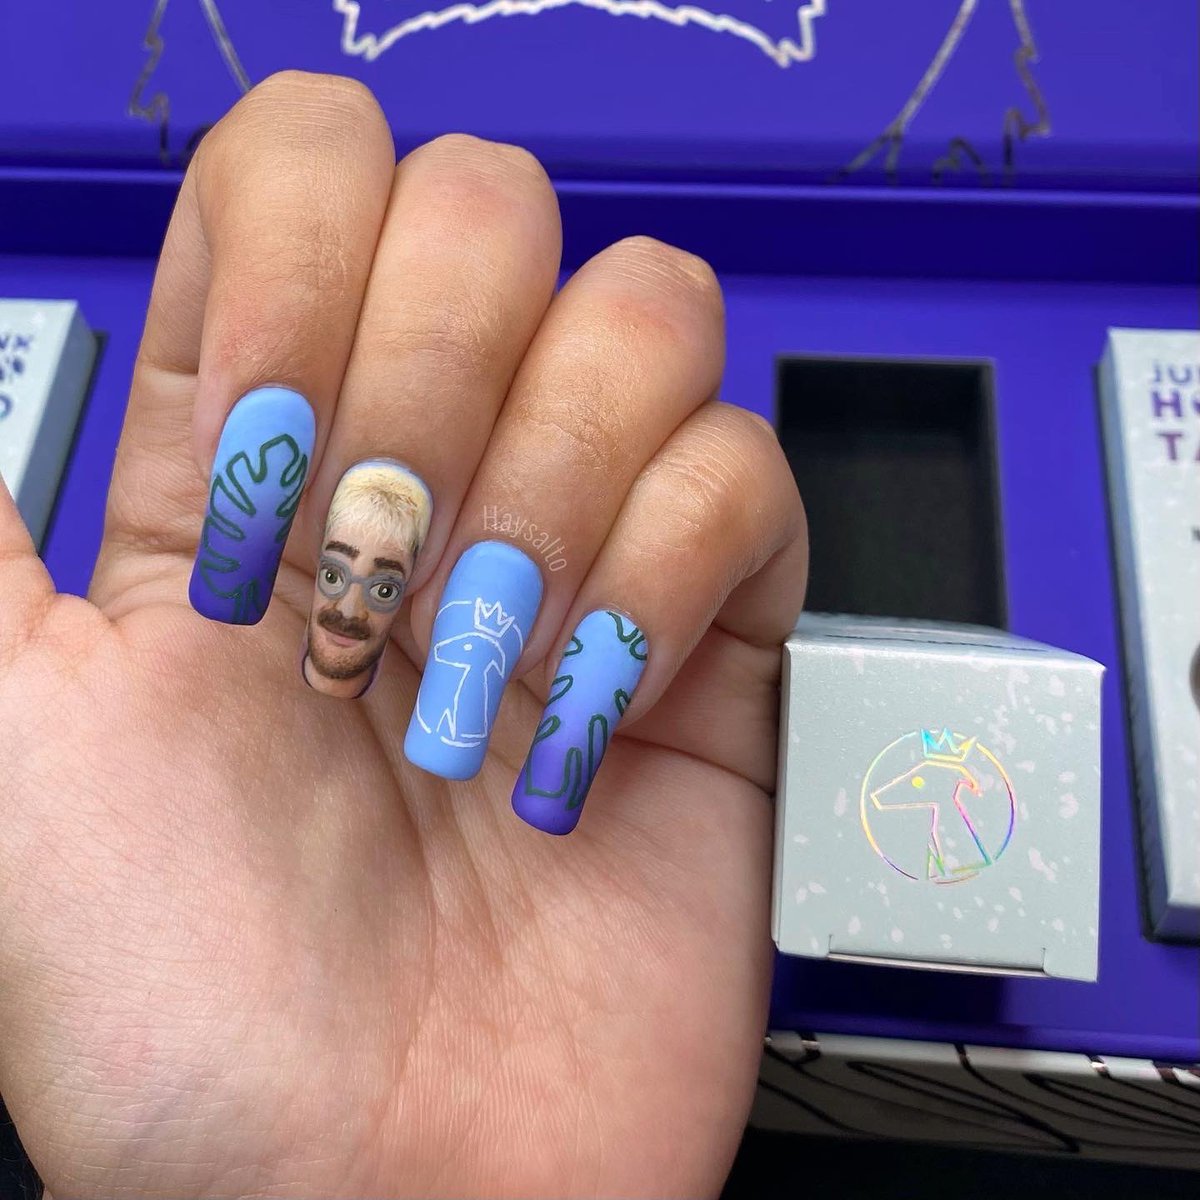 @nailogical said I could paint Julien’s face on my nails, so I accepted the challenge! I used all 5 of the new polishes in @holotaco ‘s collab with #juliensolomita ! Here’s how it turned out! 🥰💙